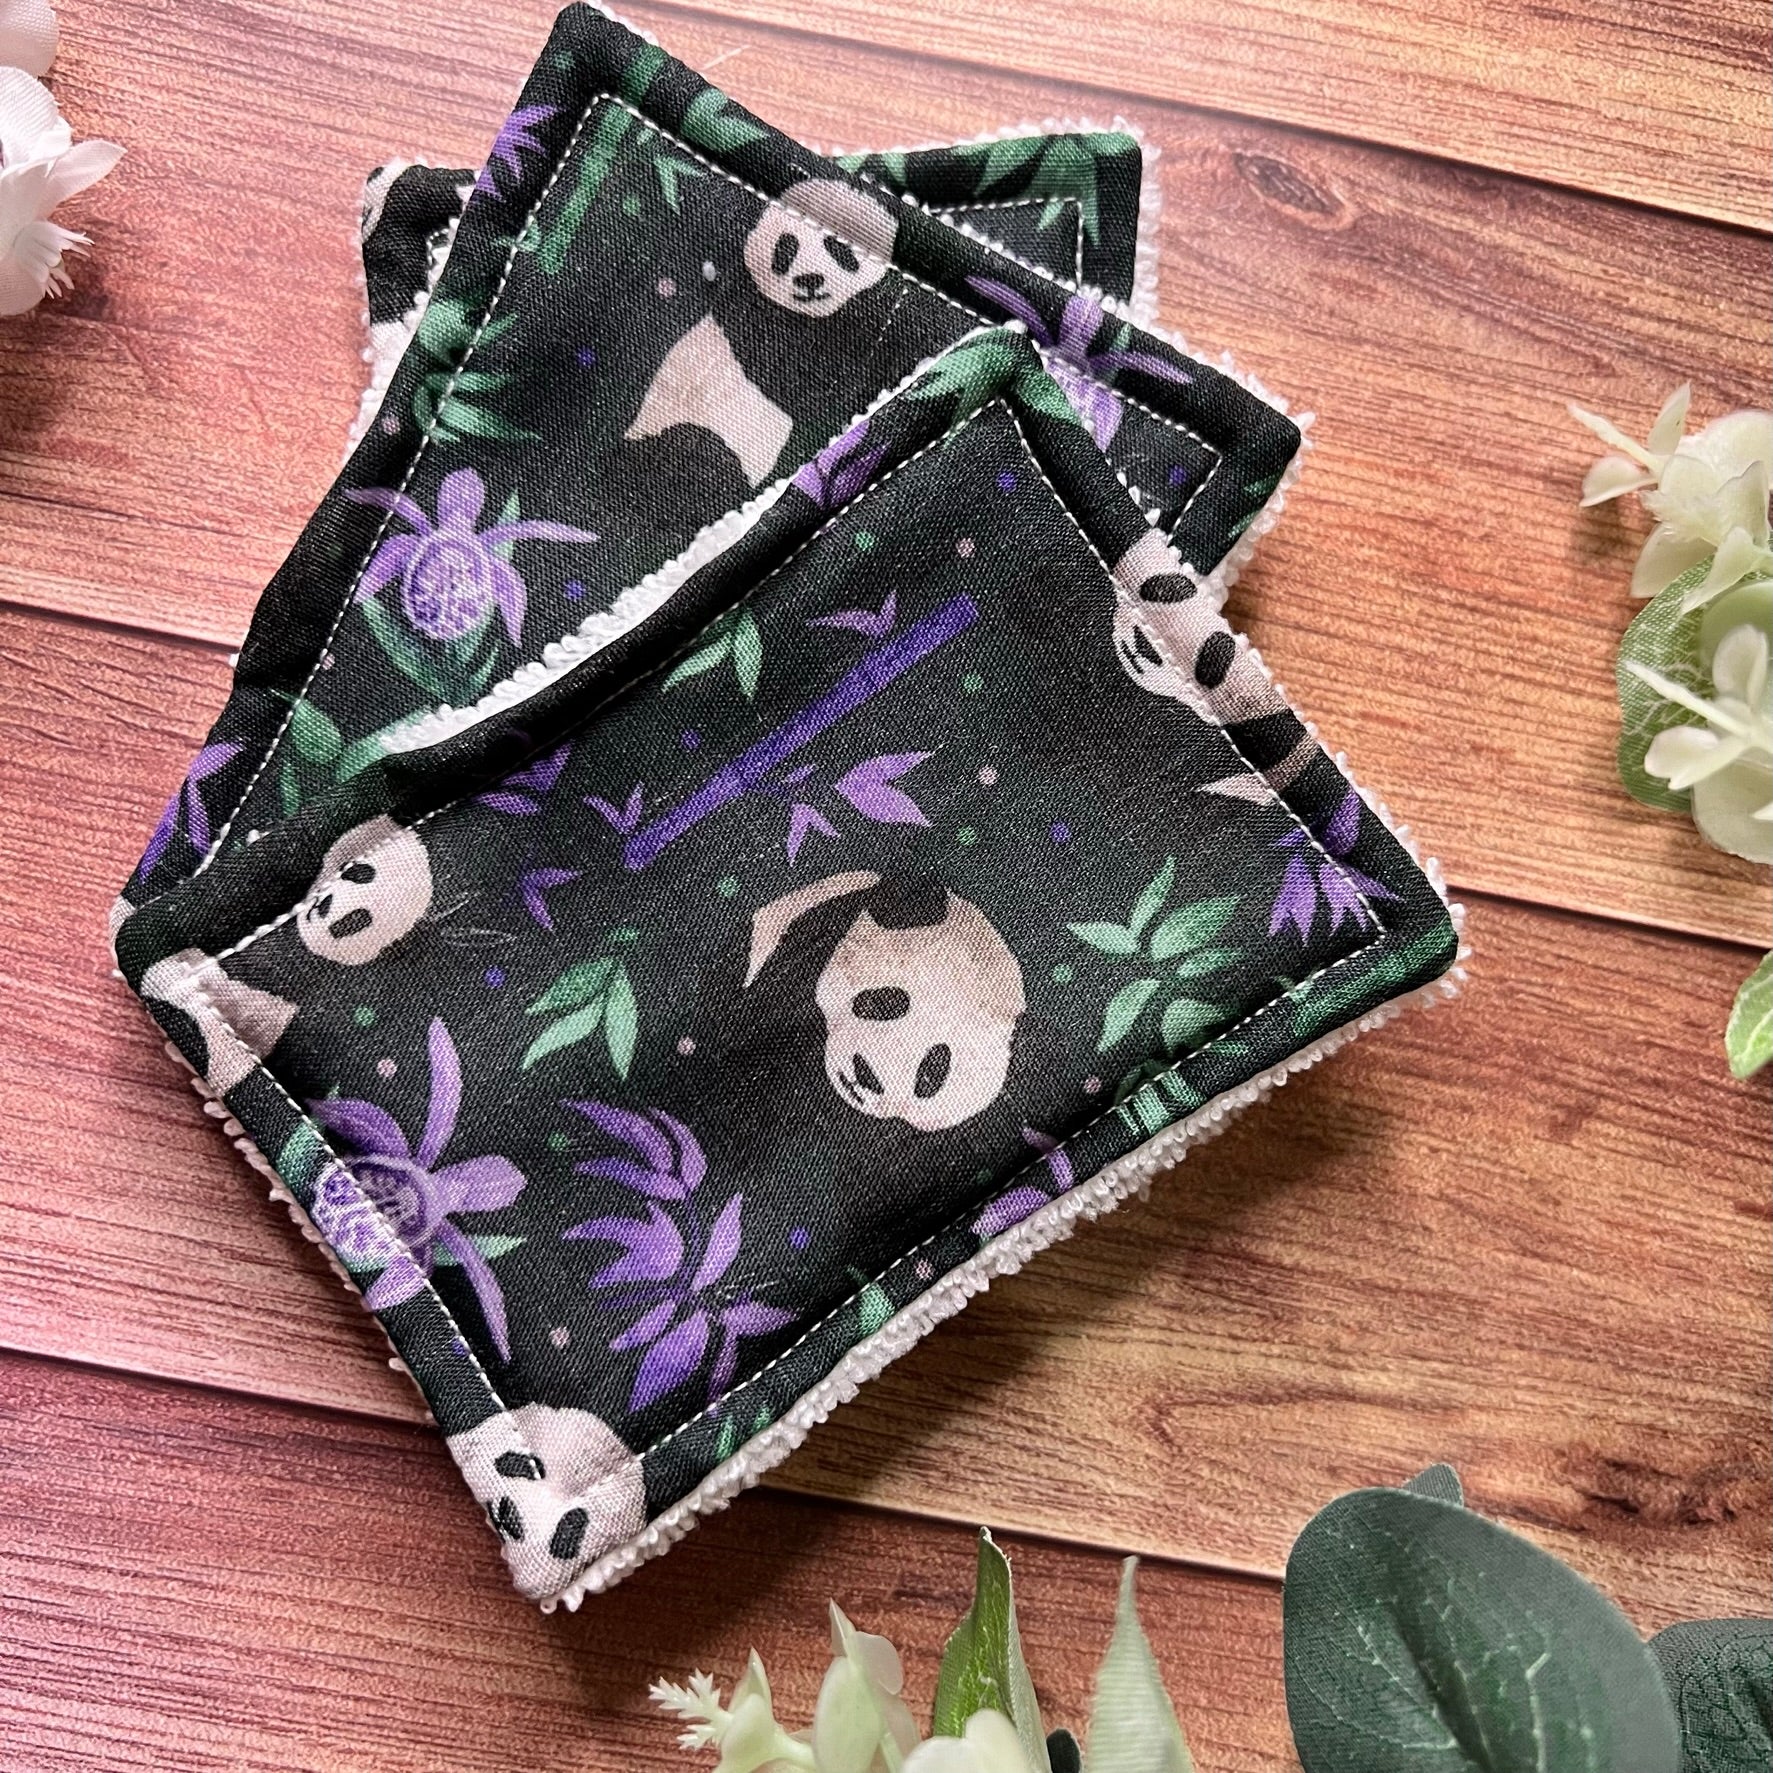 shop panda gift ideas for our panda exfoliating face pads here with a purple background and towelling on the back for skincare.